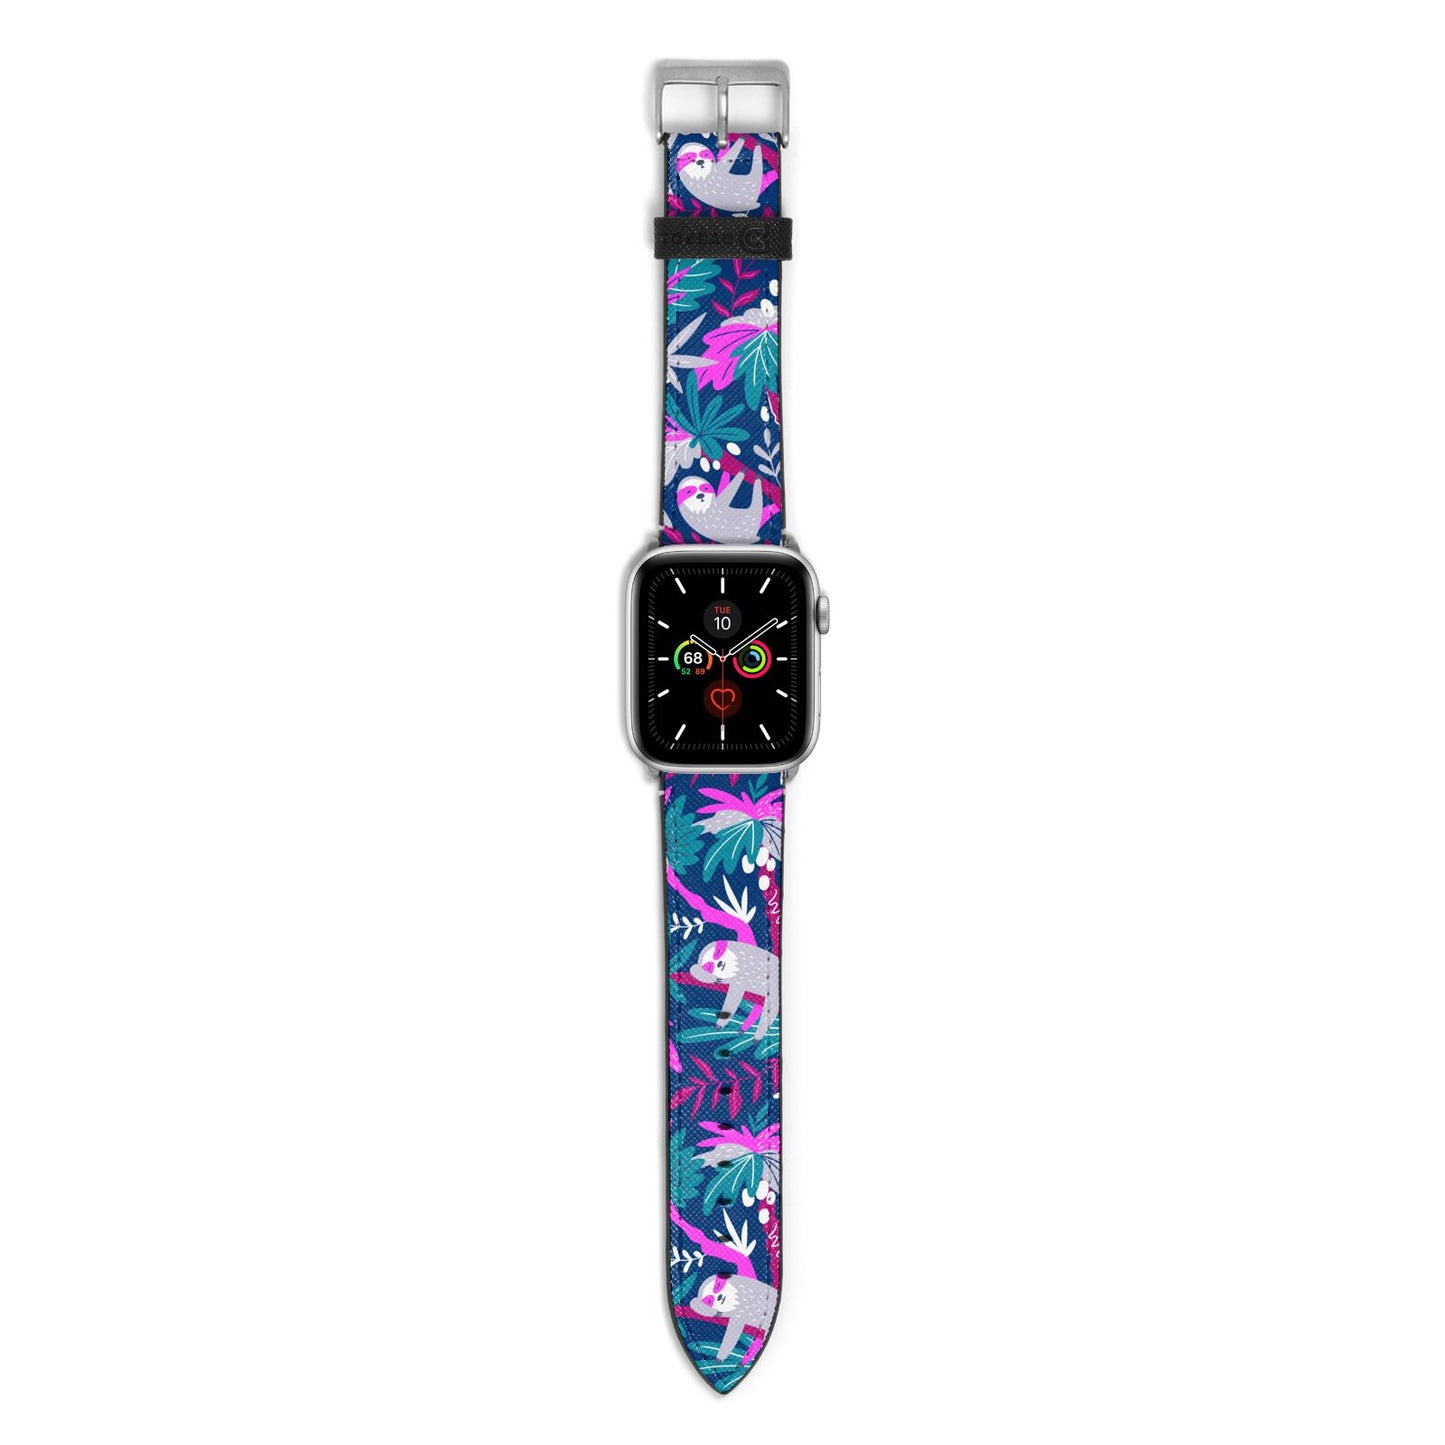 Sloth Apple Watch Strap with Silver Hardware